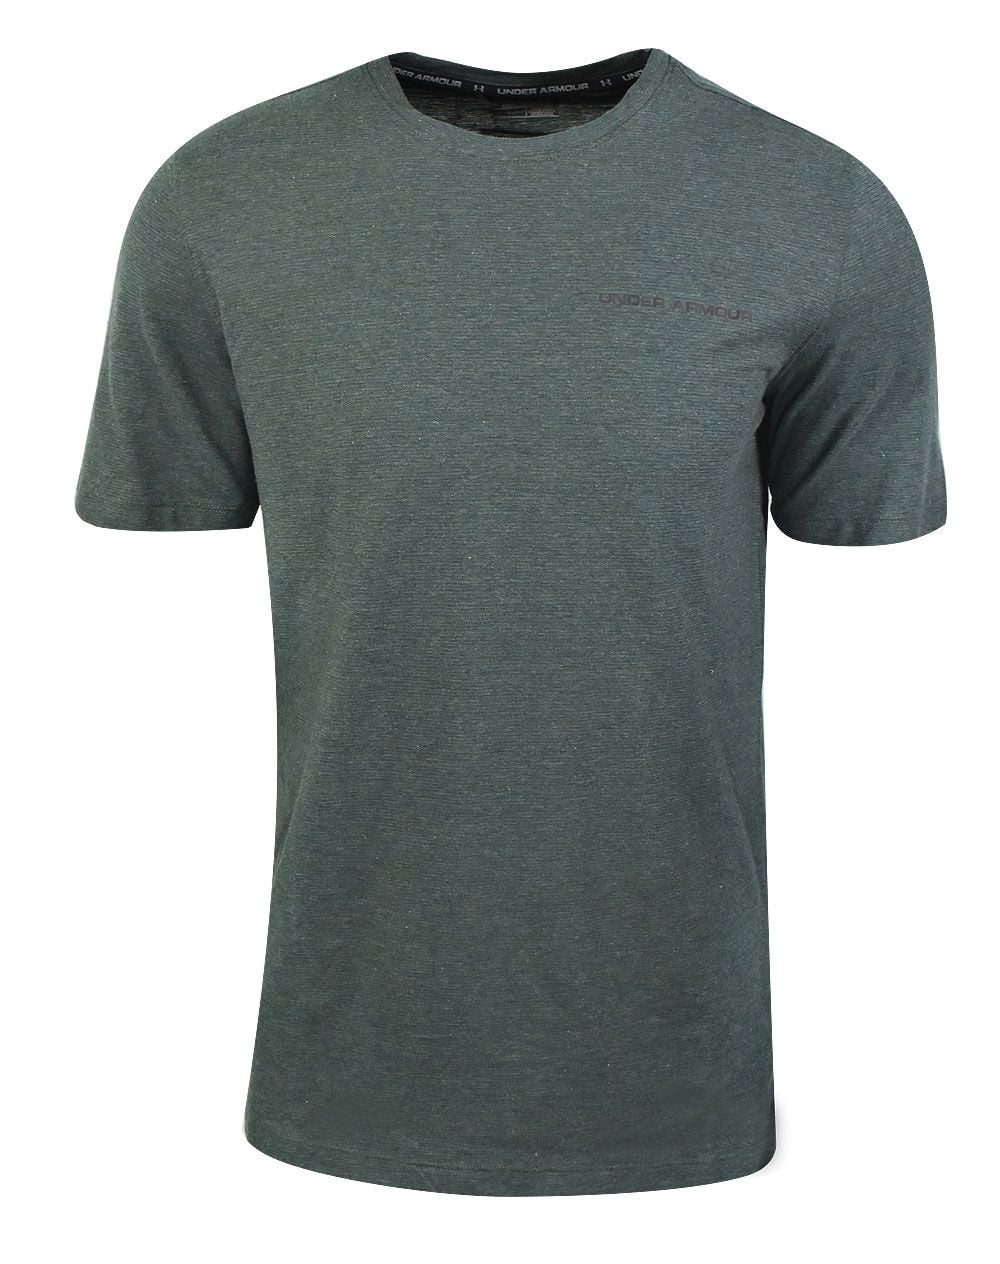 men's charged cotton t shirt